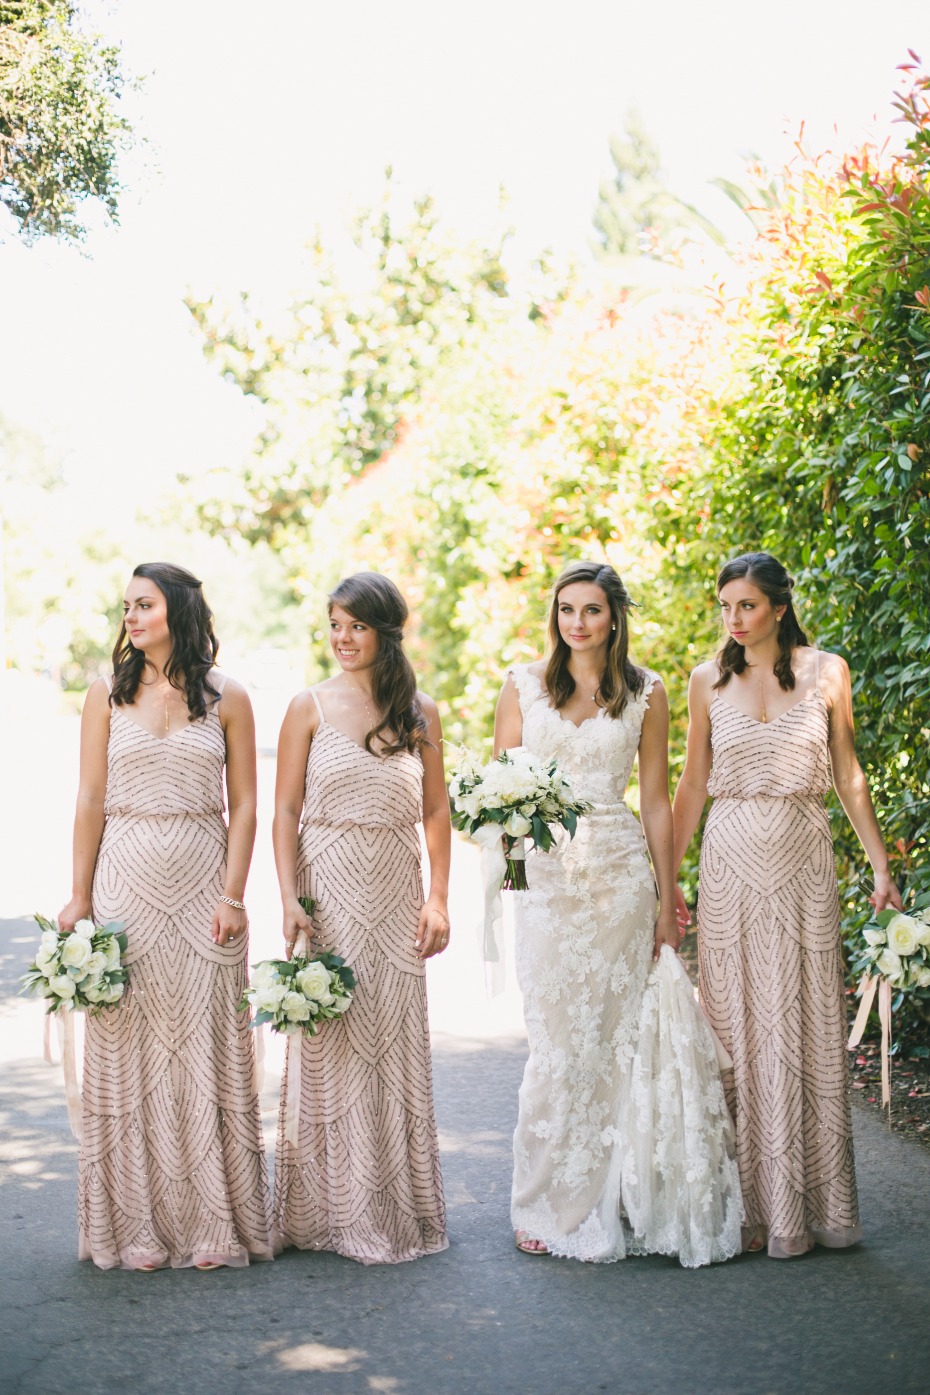 Adrianna Papell bridesmaid dresses in blush